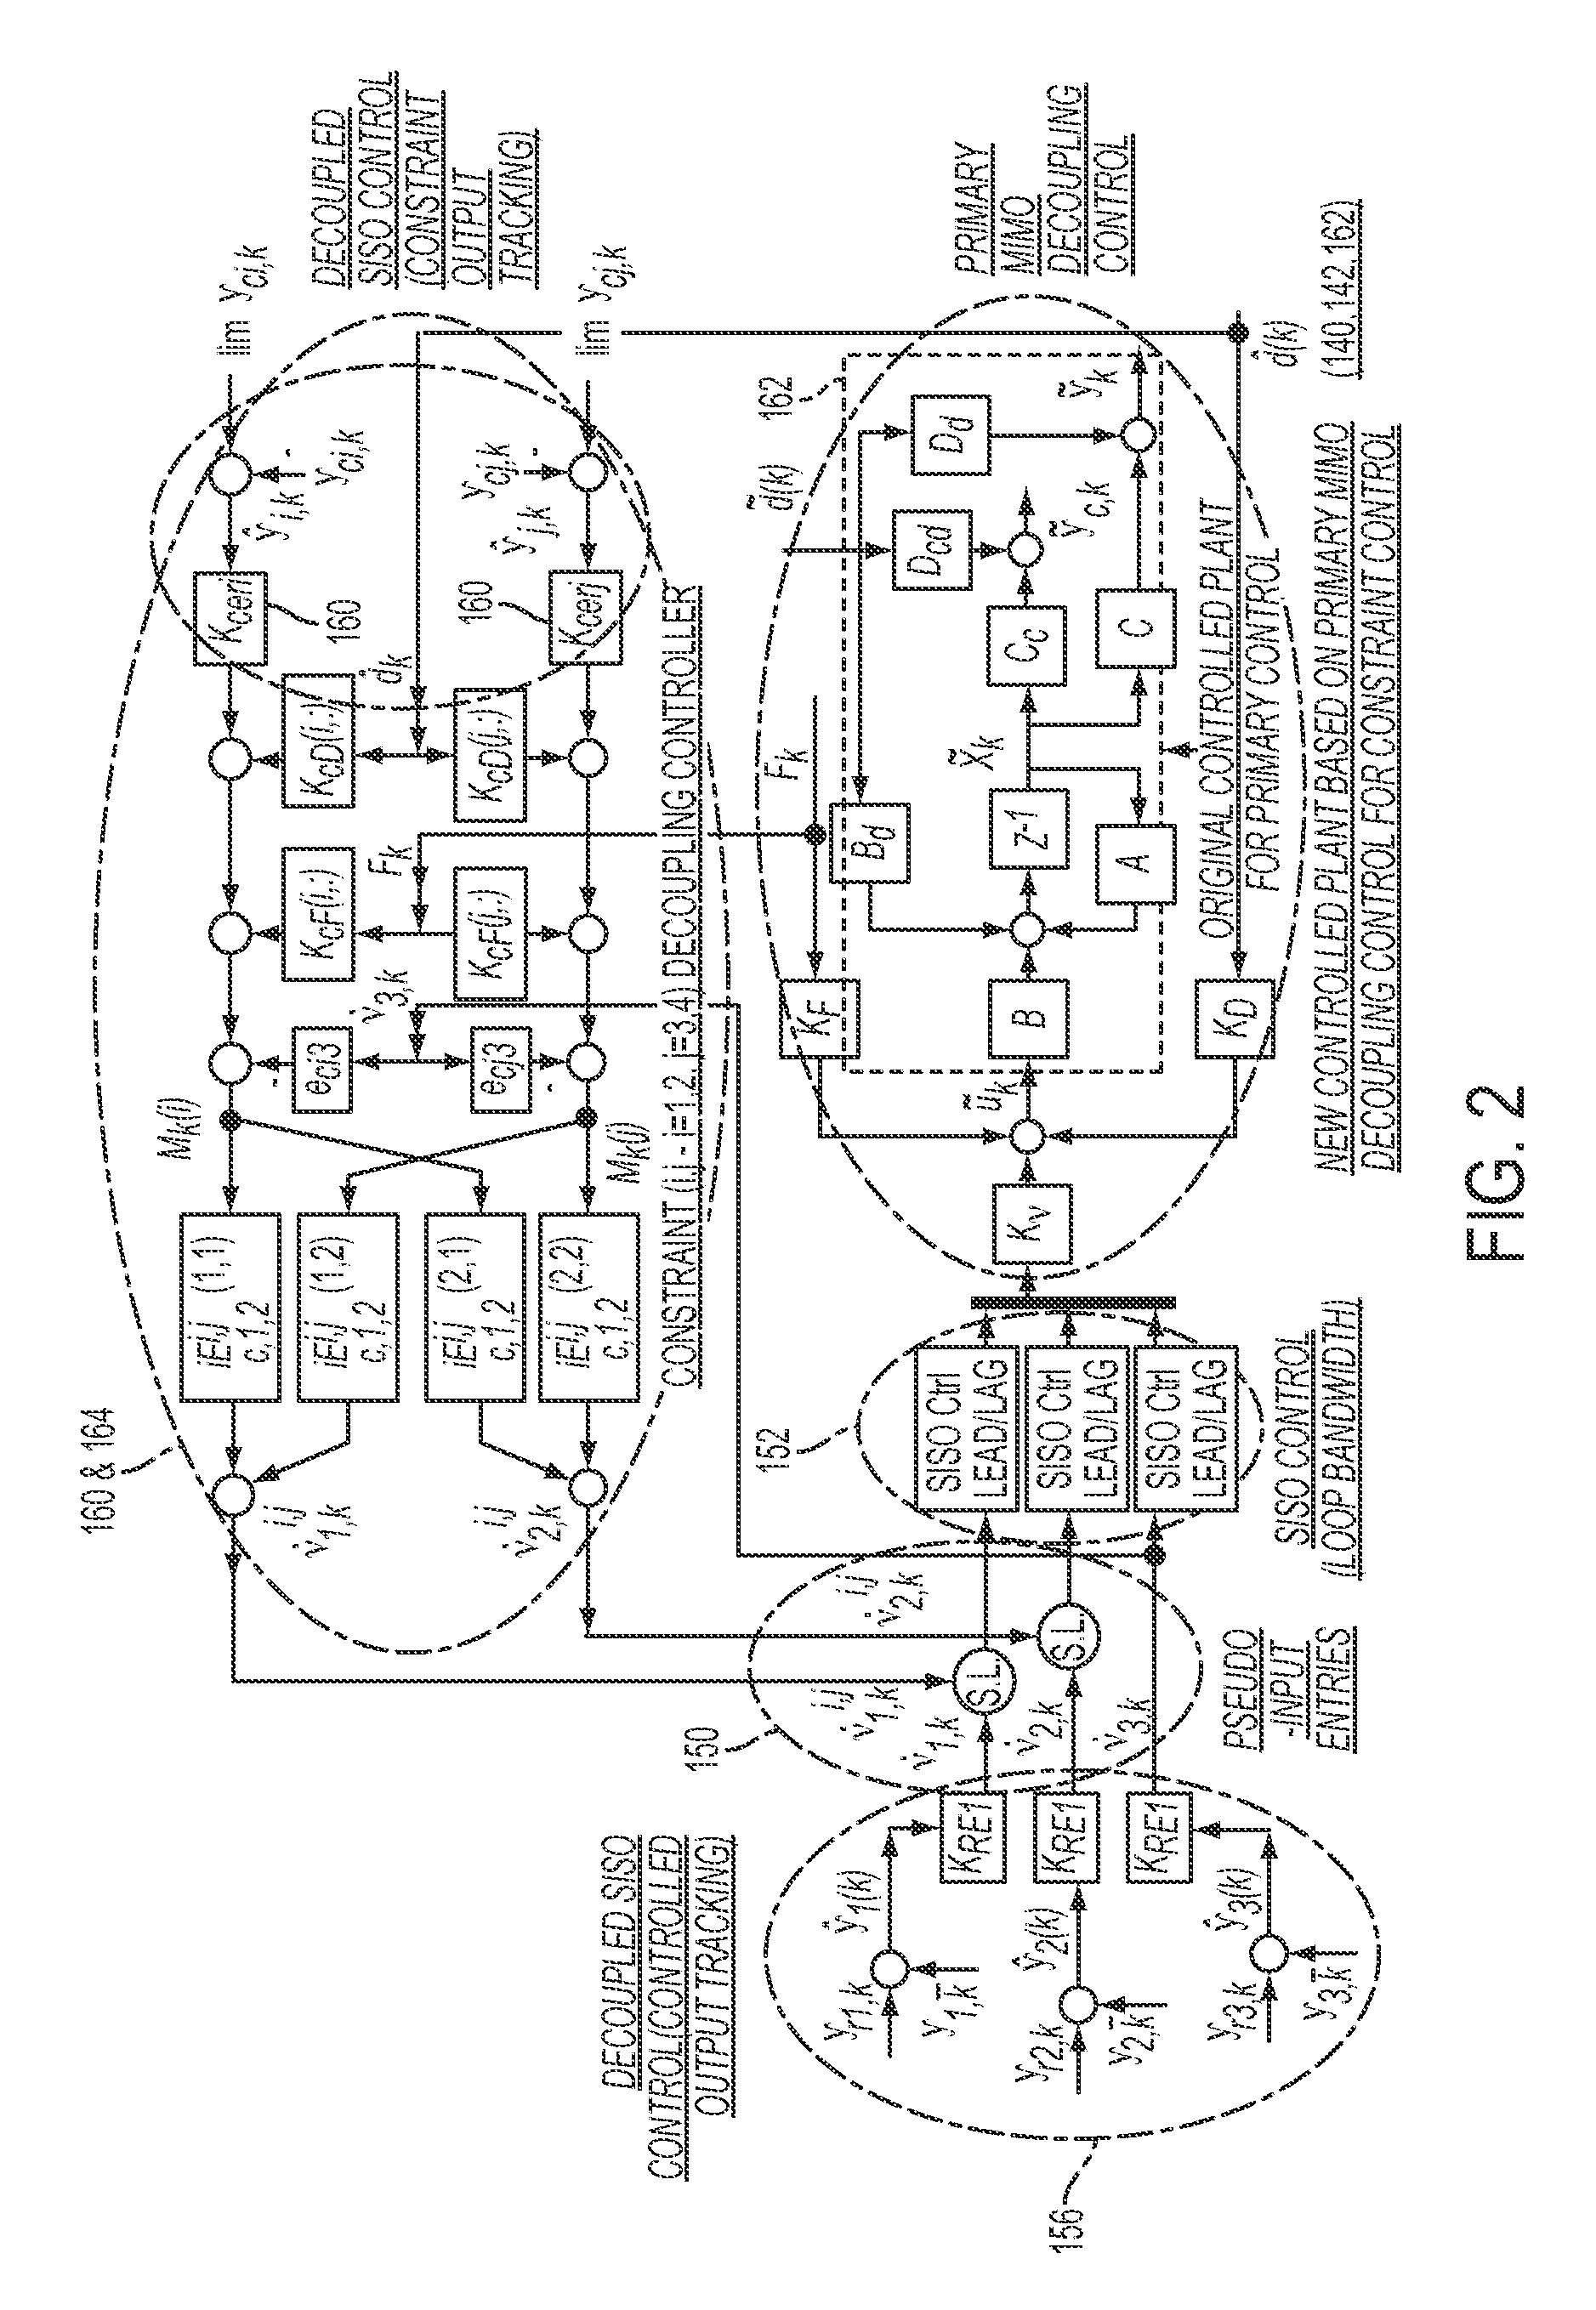 Methods and Apparatuses for Advanced Multiple Variable Control with High Dimension Multiple Constraints